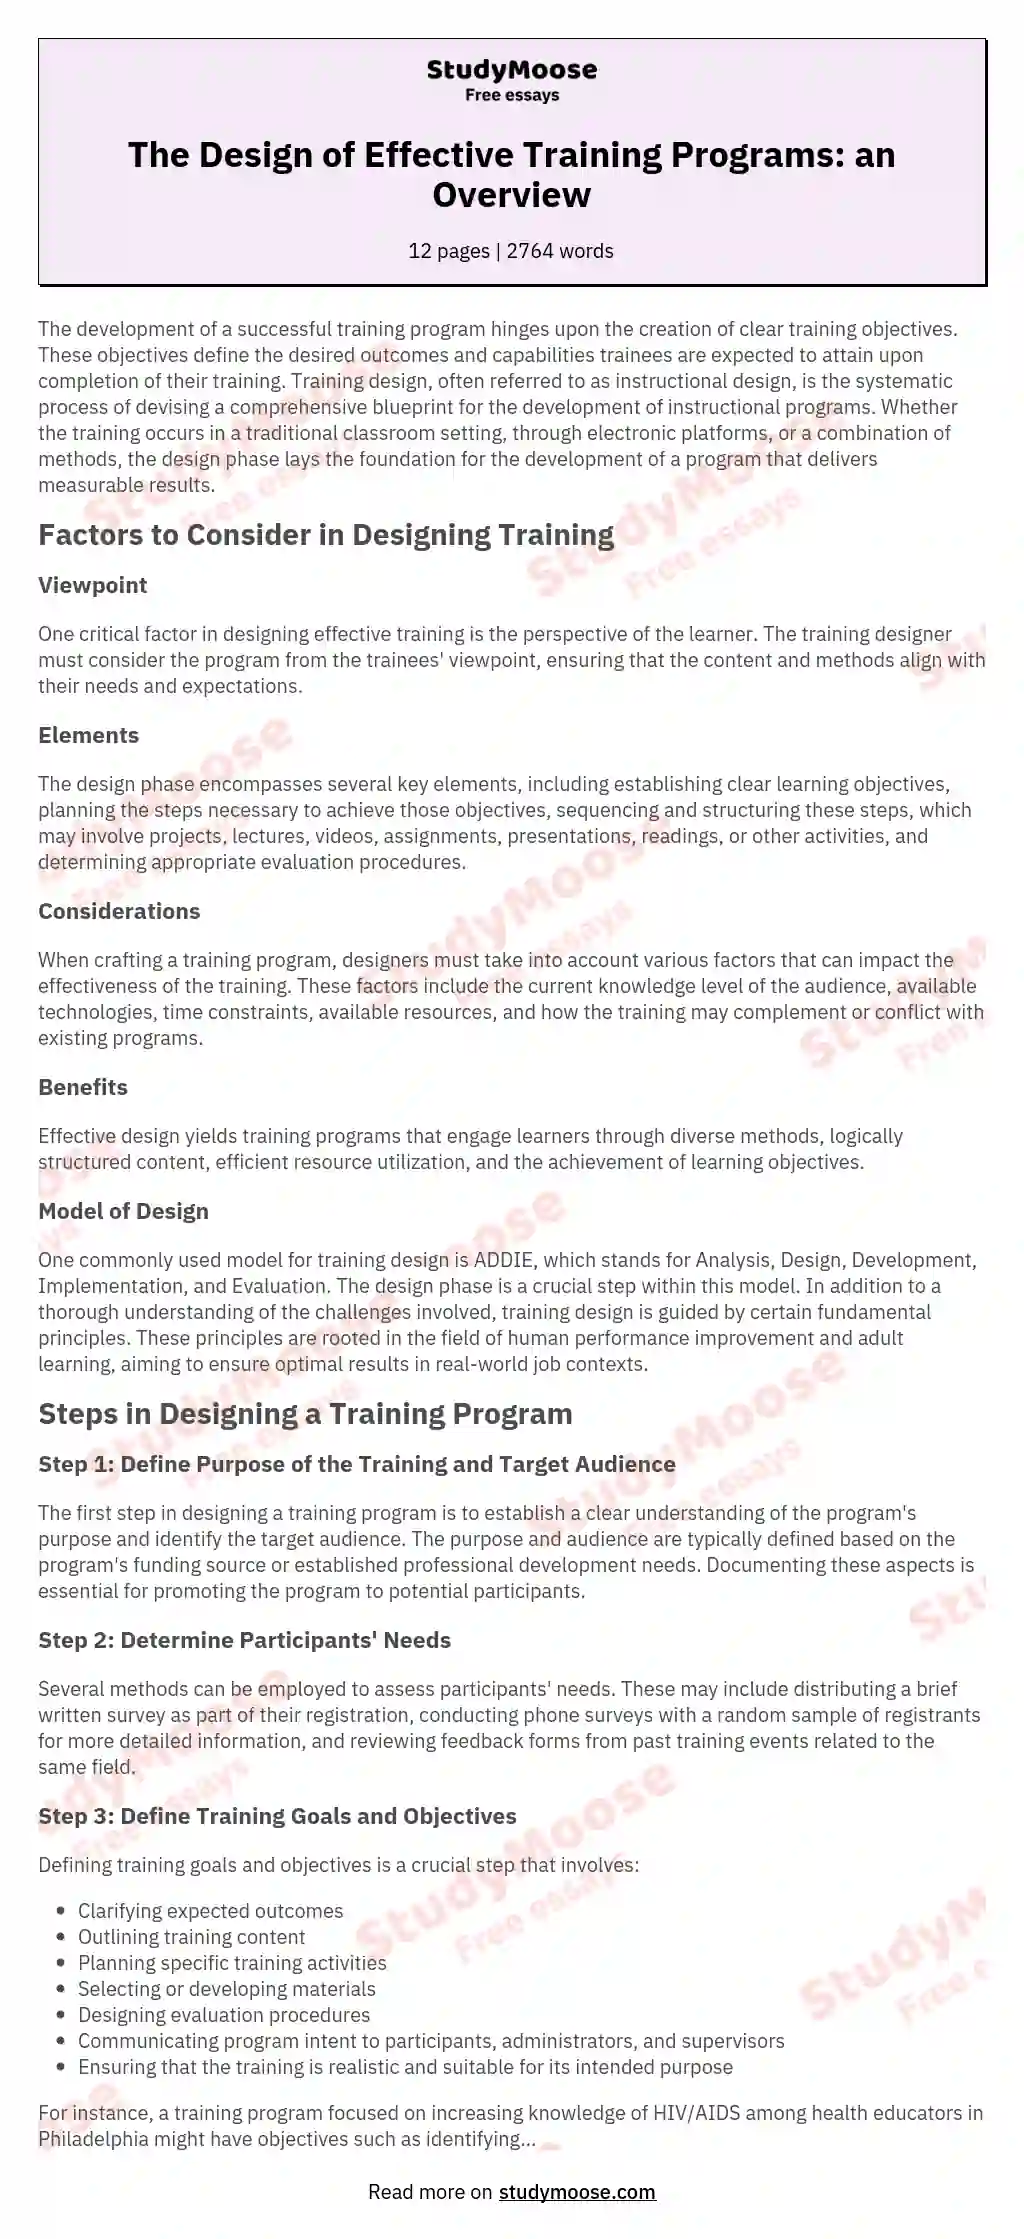 The Design of Effective Training Programs: an Overview essay